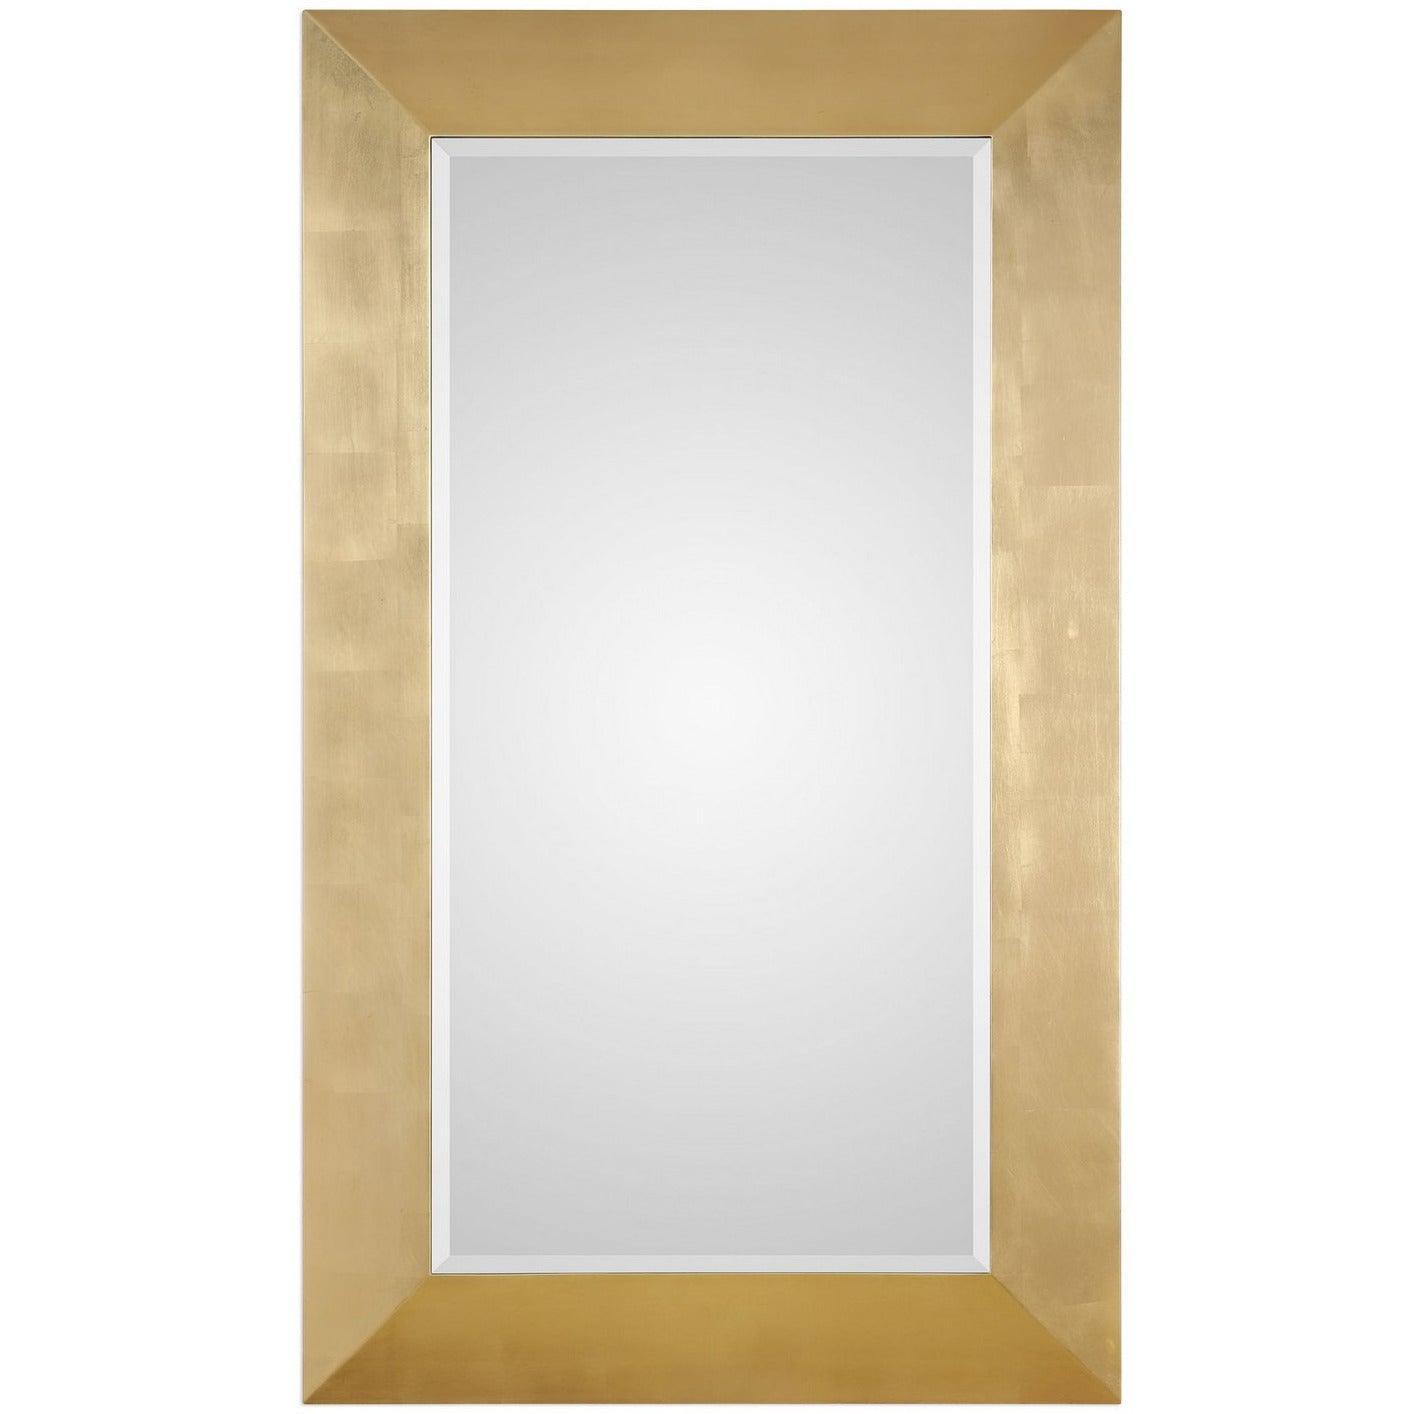 The Uttermost - Chaney Mirror - 09324 | Montreal Lighting & Hardware